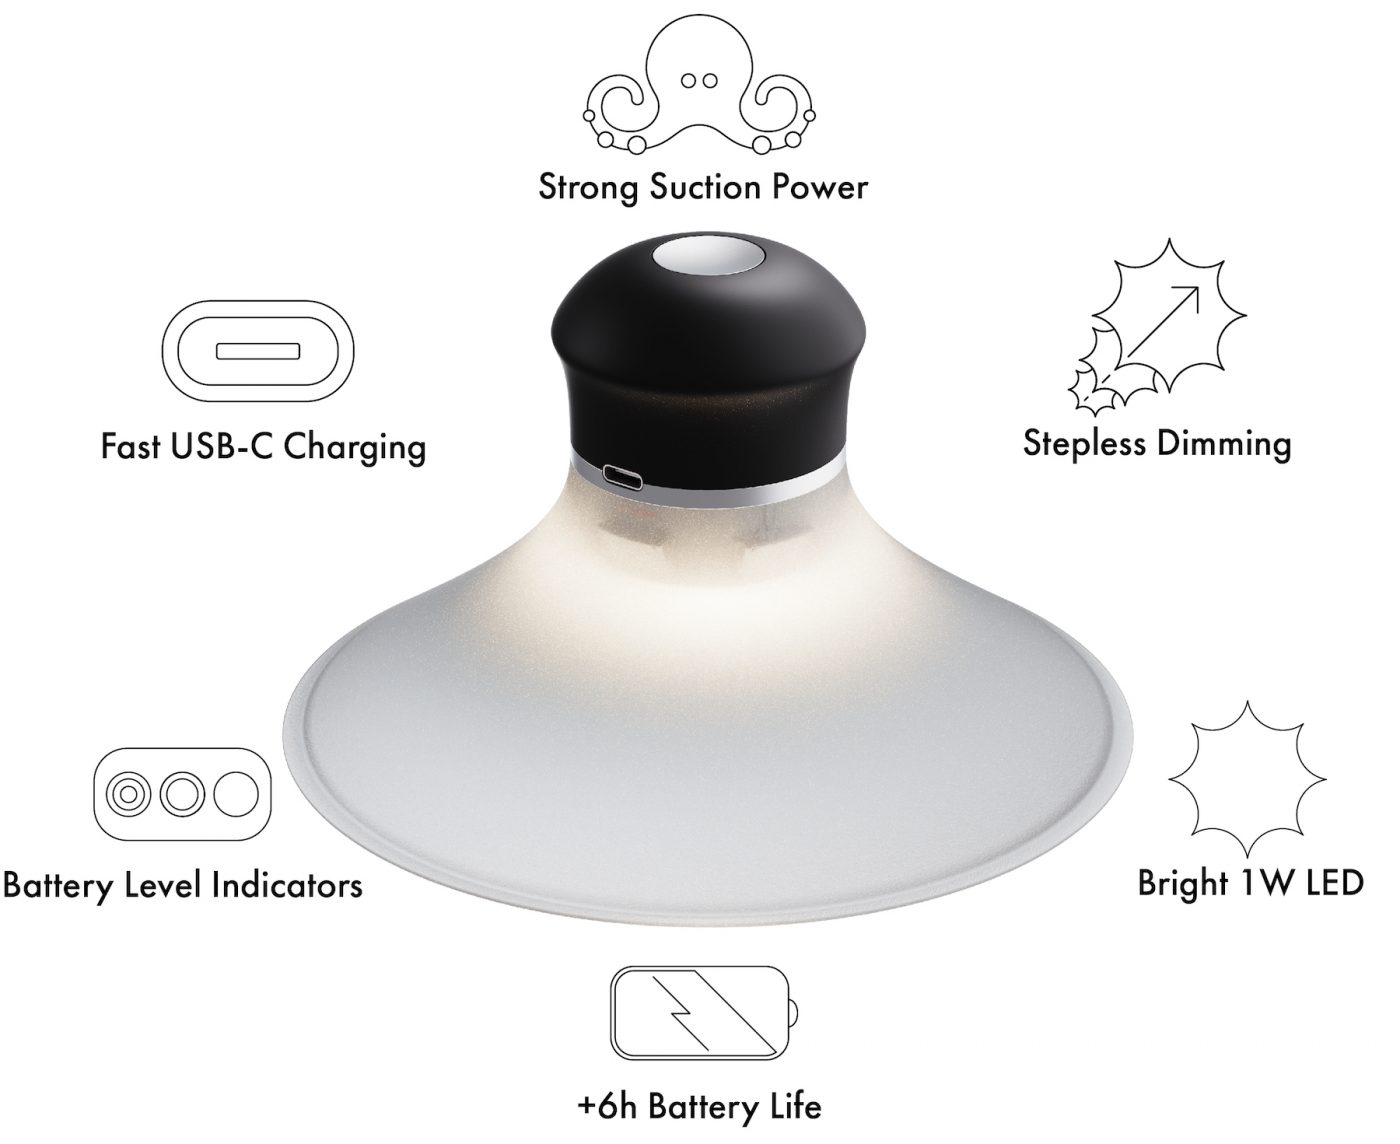 Neozoon - The Portable Suction Cup Lamp » CoolBacker